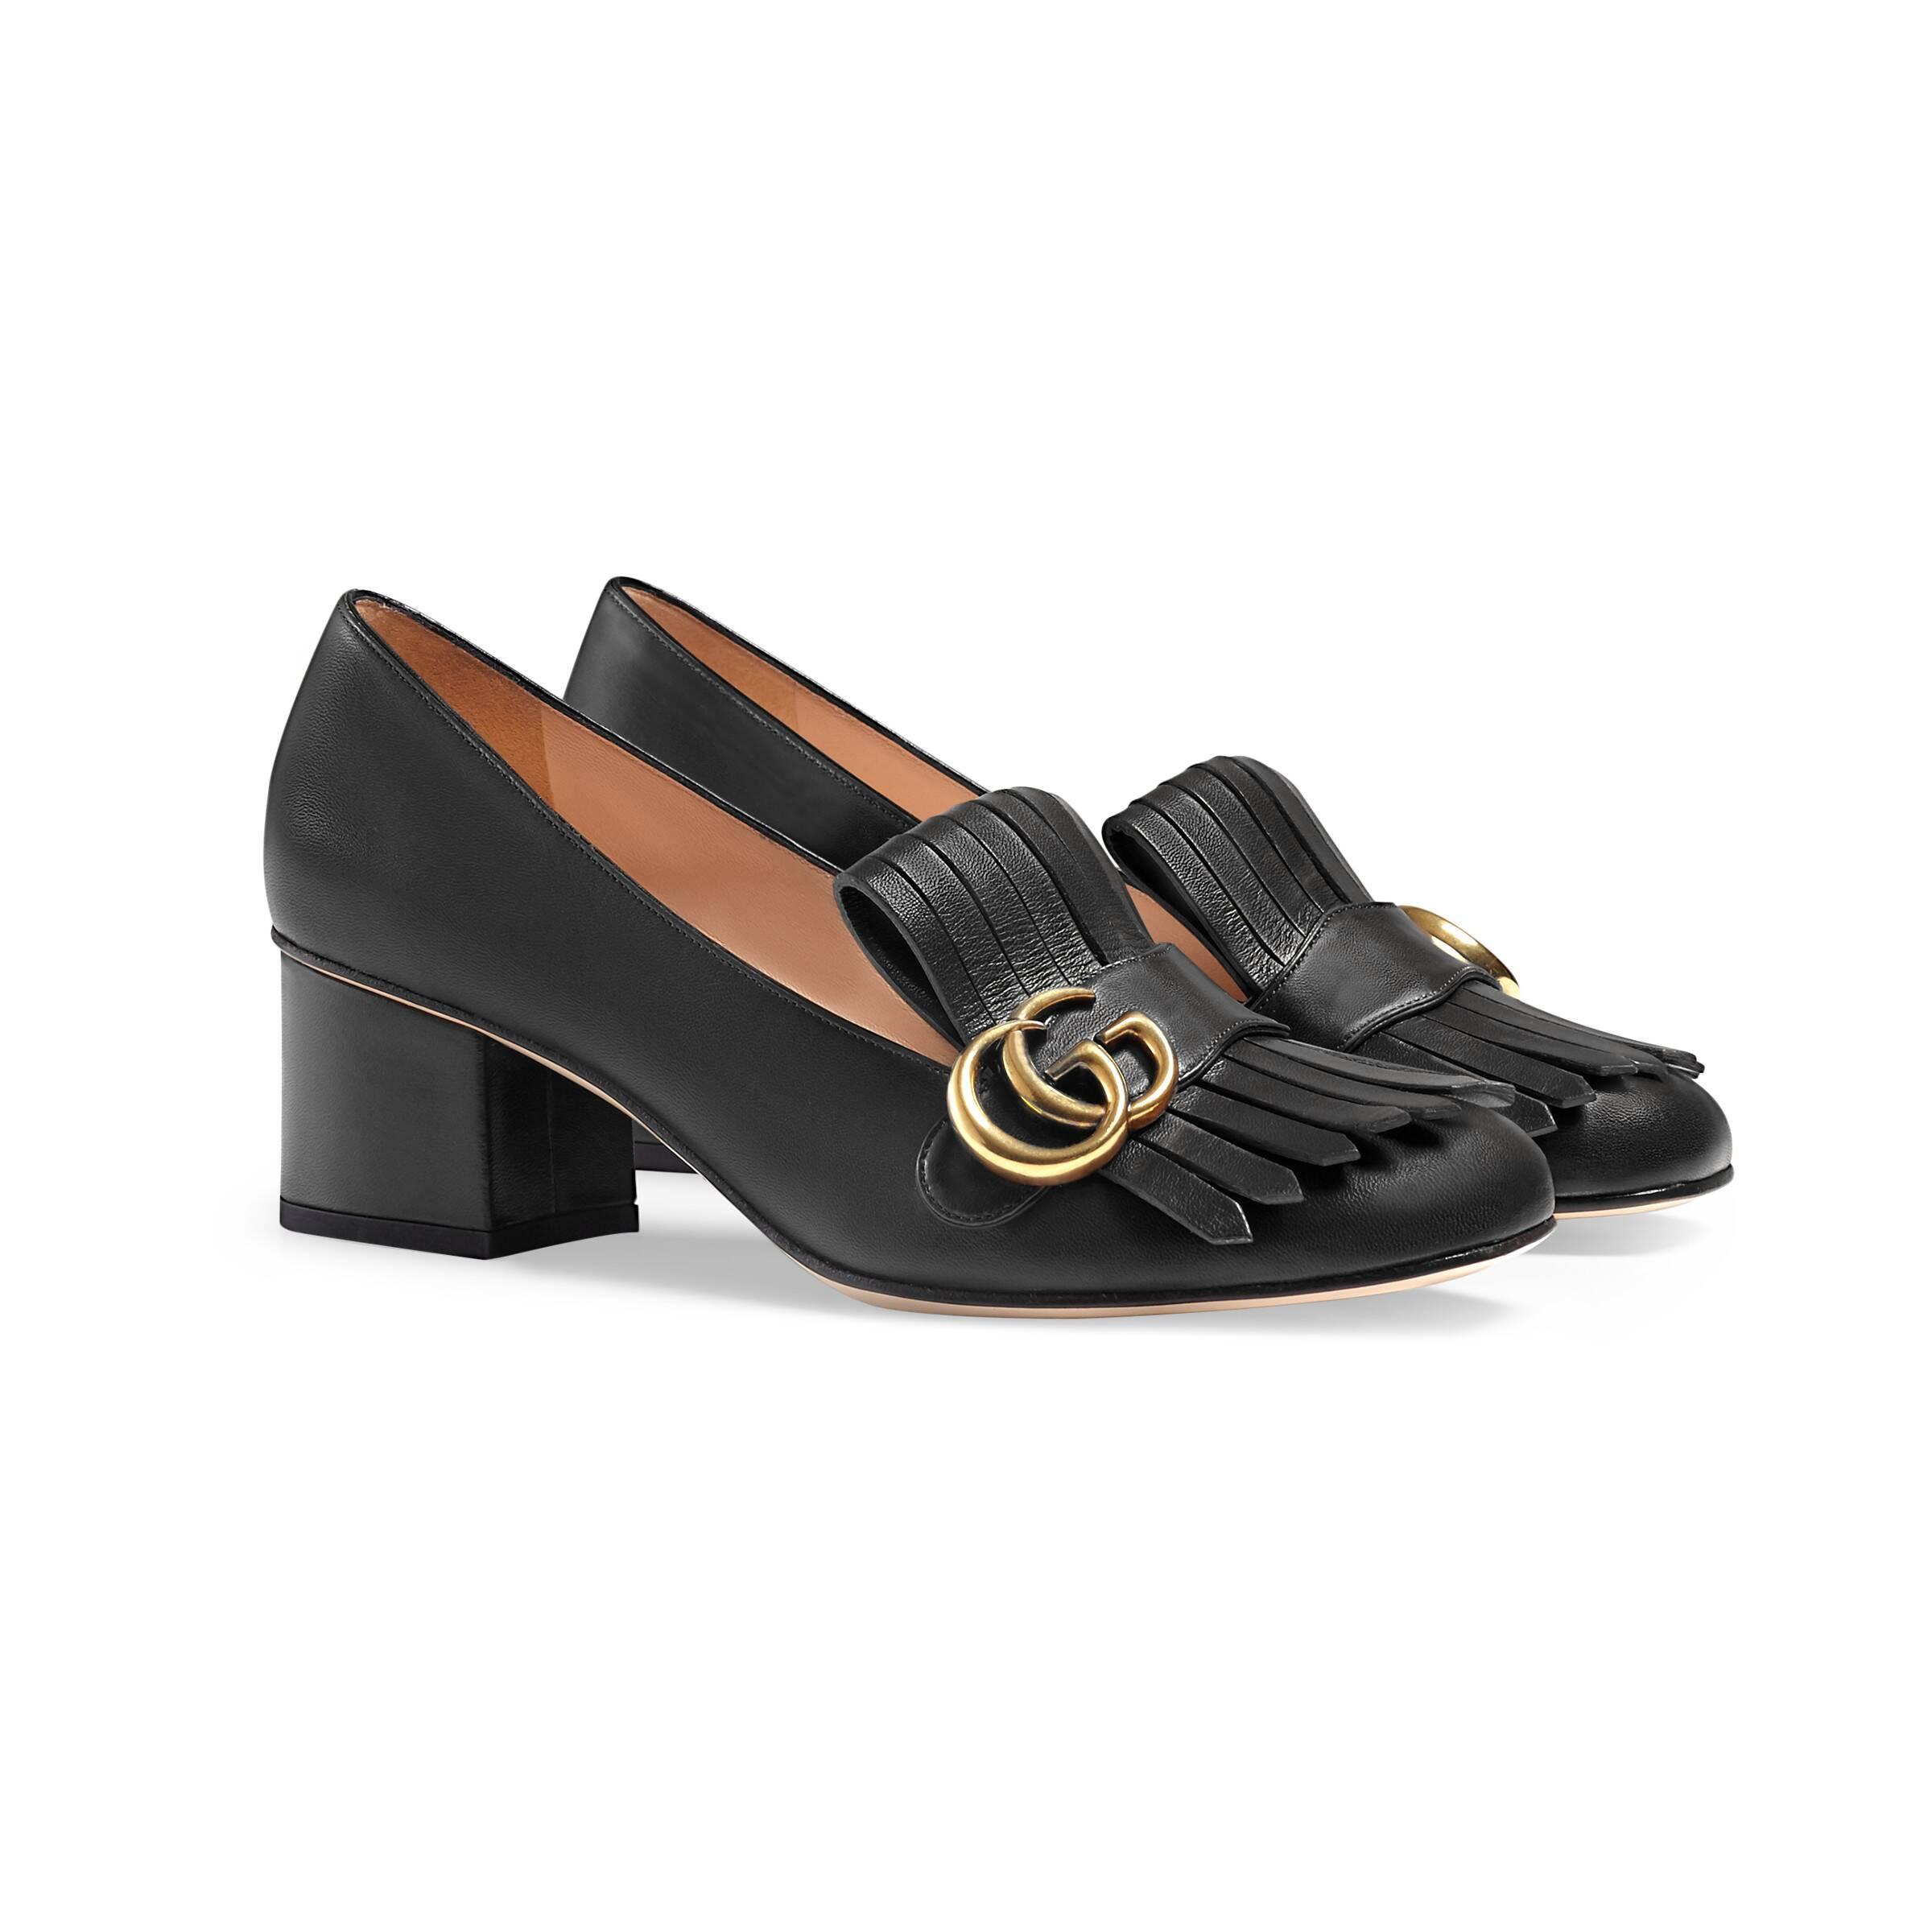 Gucci Leather Mid-Heel Marmont Pump in Black - Save 75% - Lyst